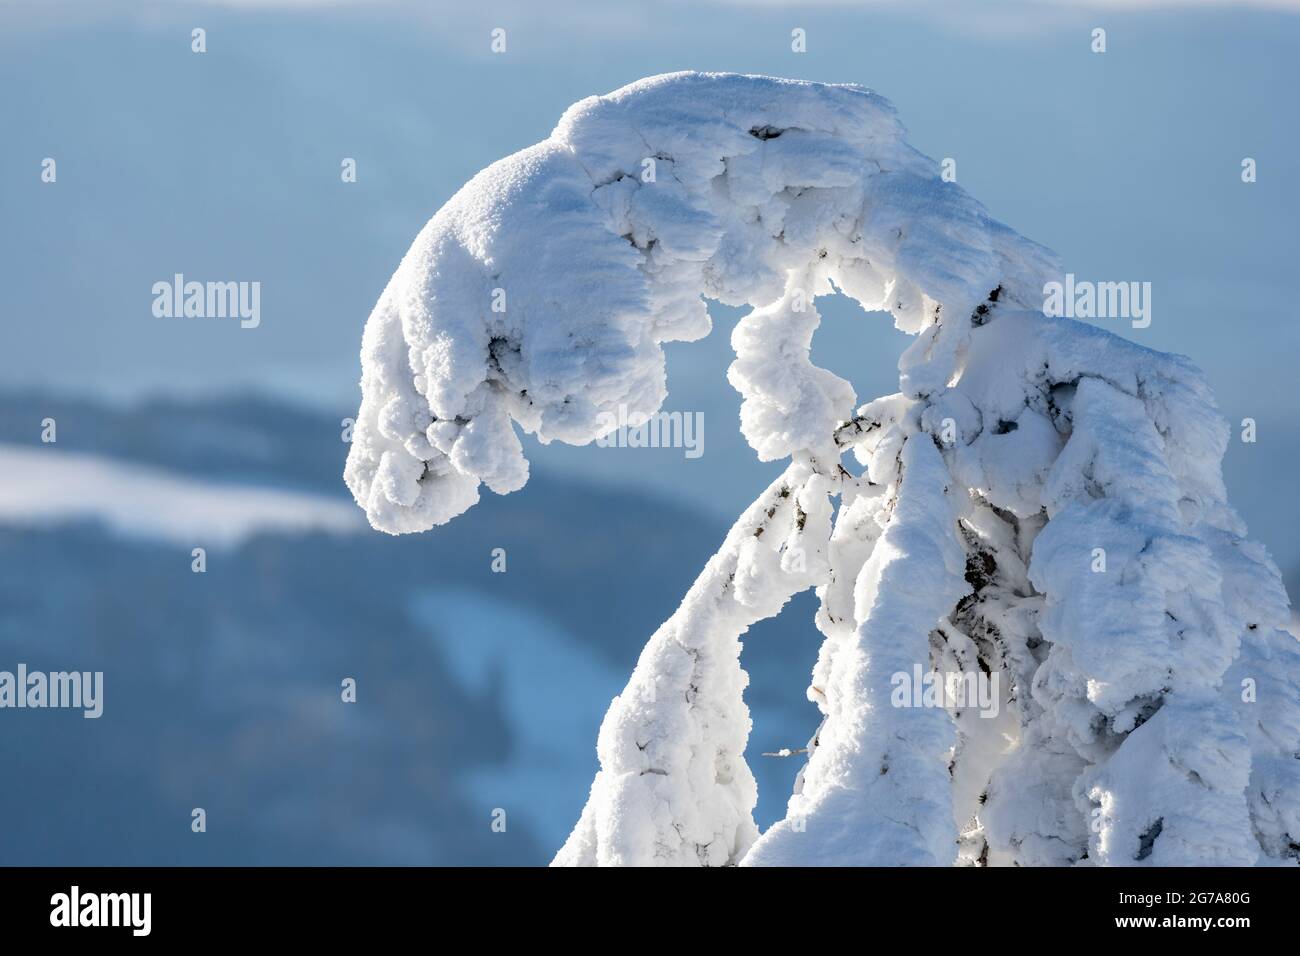 Snow-covered fir trees in the Black Forest. Stock Photo